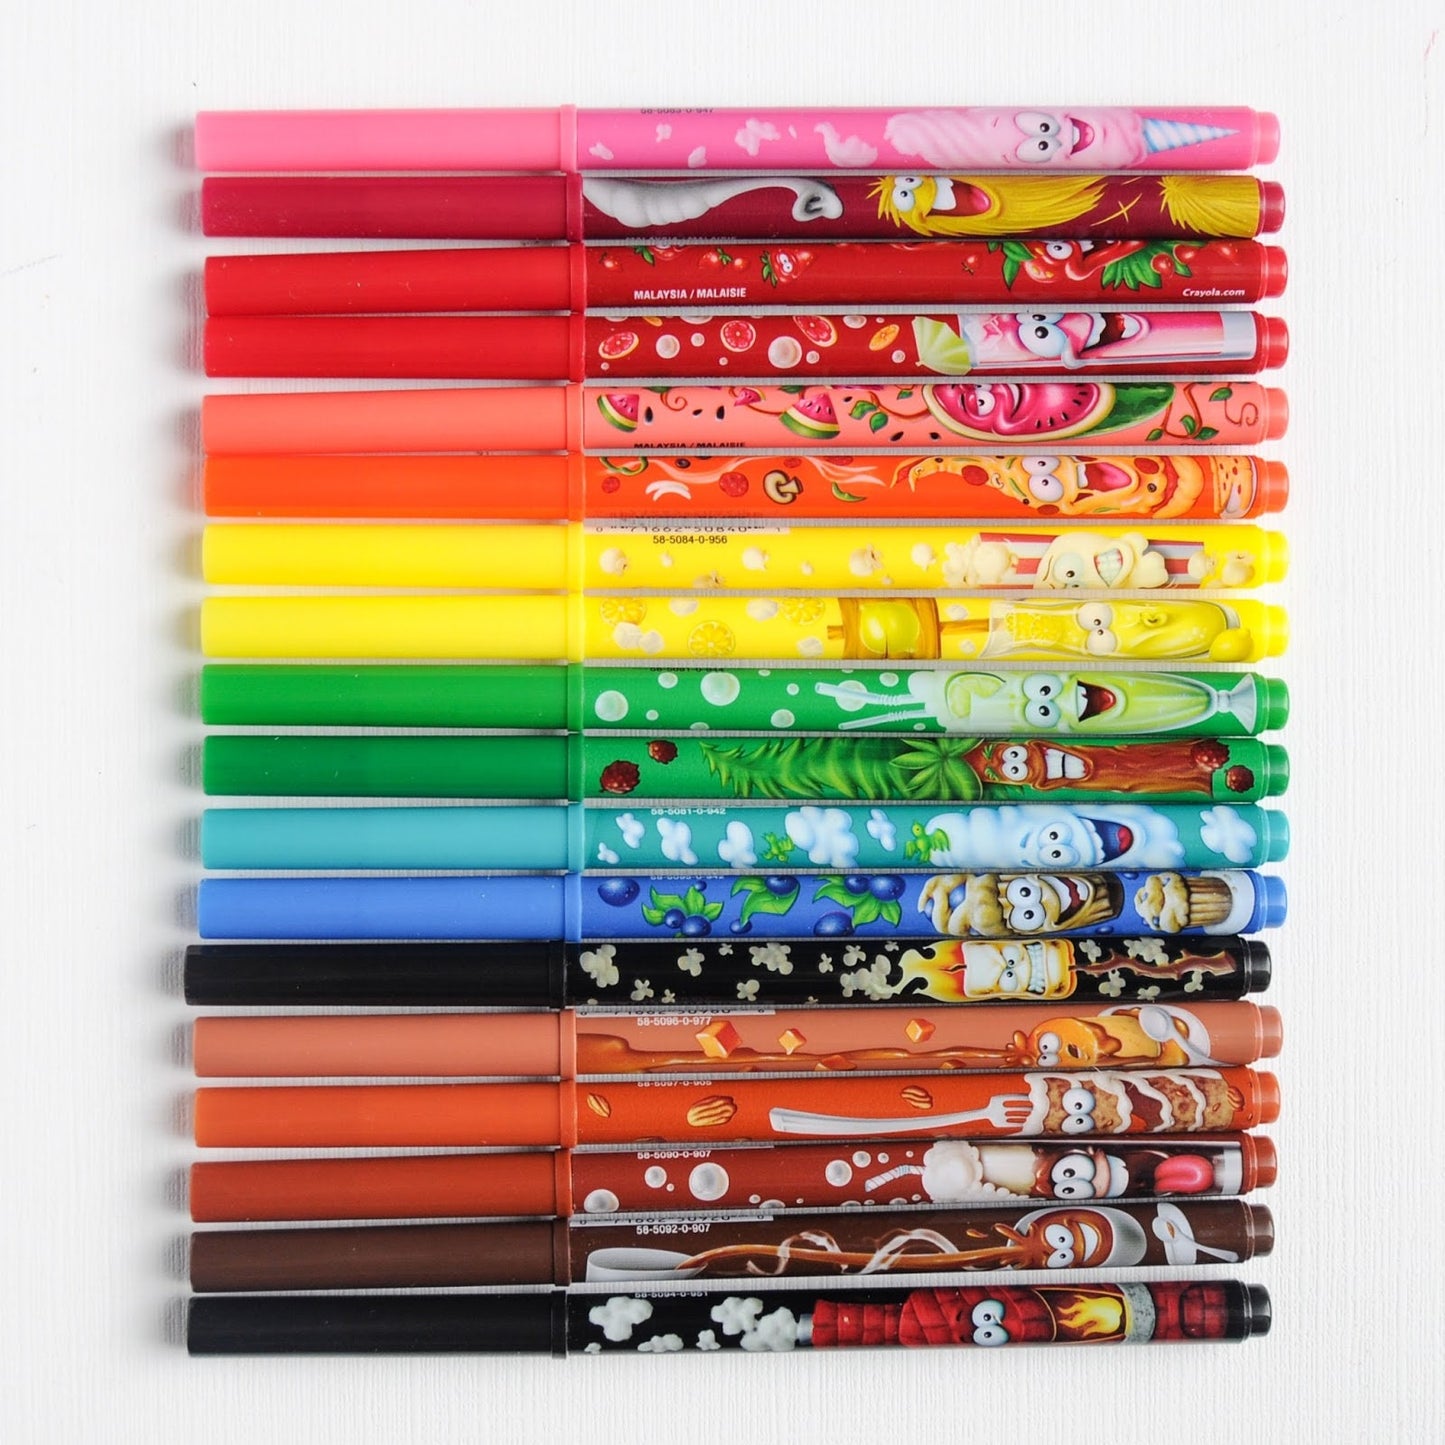 Crayola 18CT Doodle Silly Scents Markers